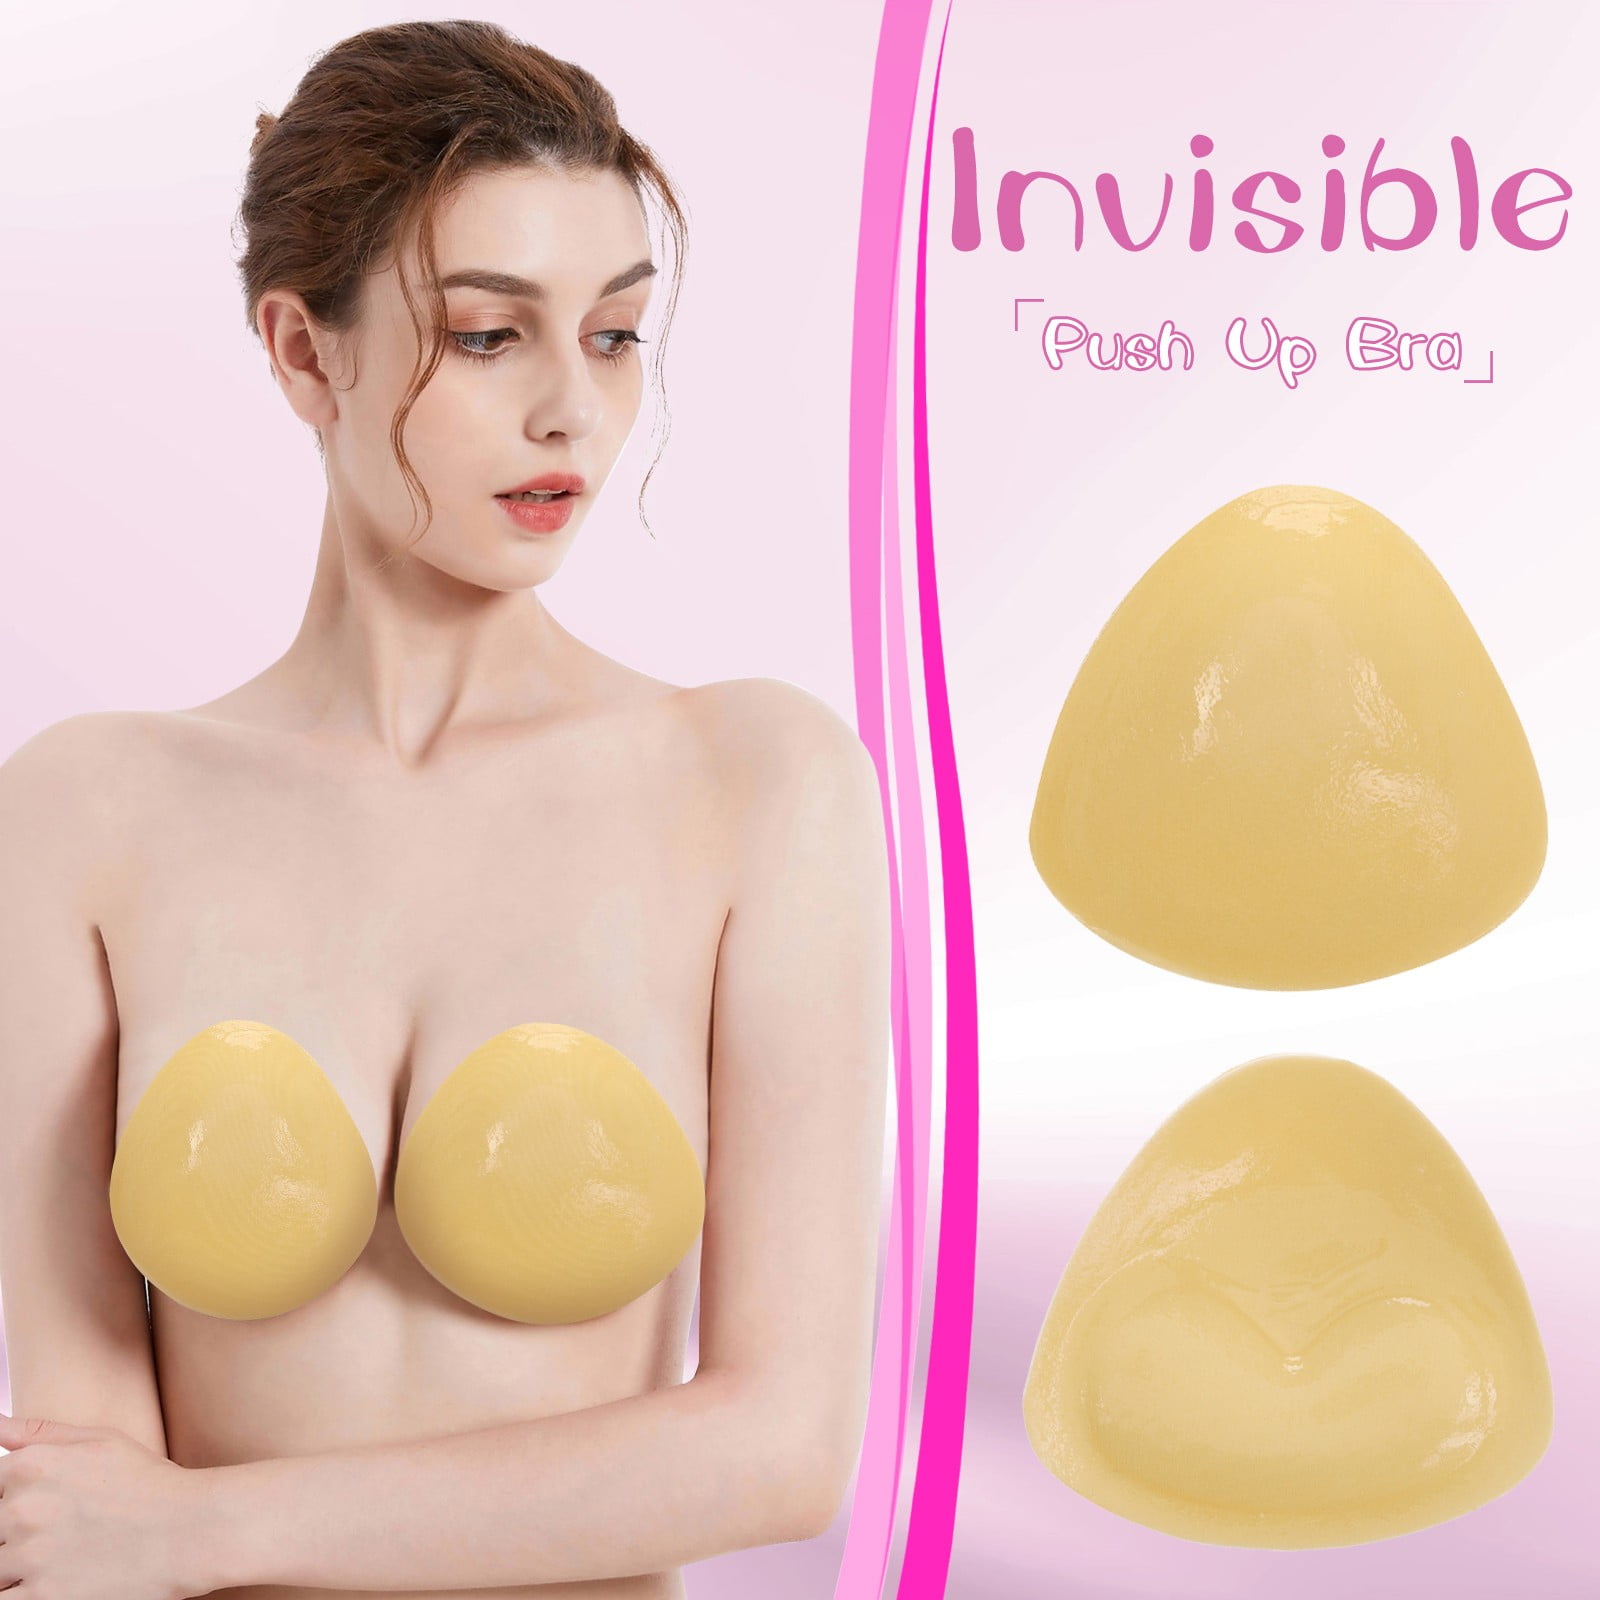 Adhesive bras for large breasts – 6 Sticky bras for D, DD and DDD sizes –  Brasforlargecups